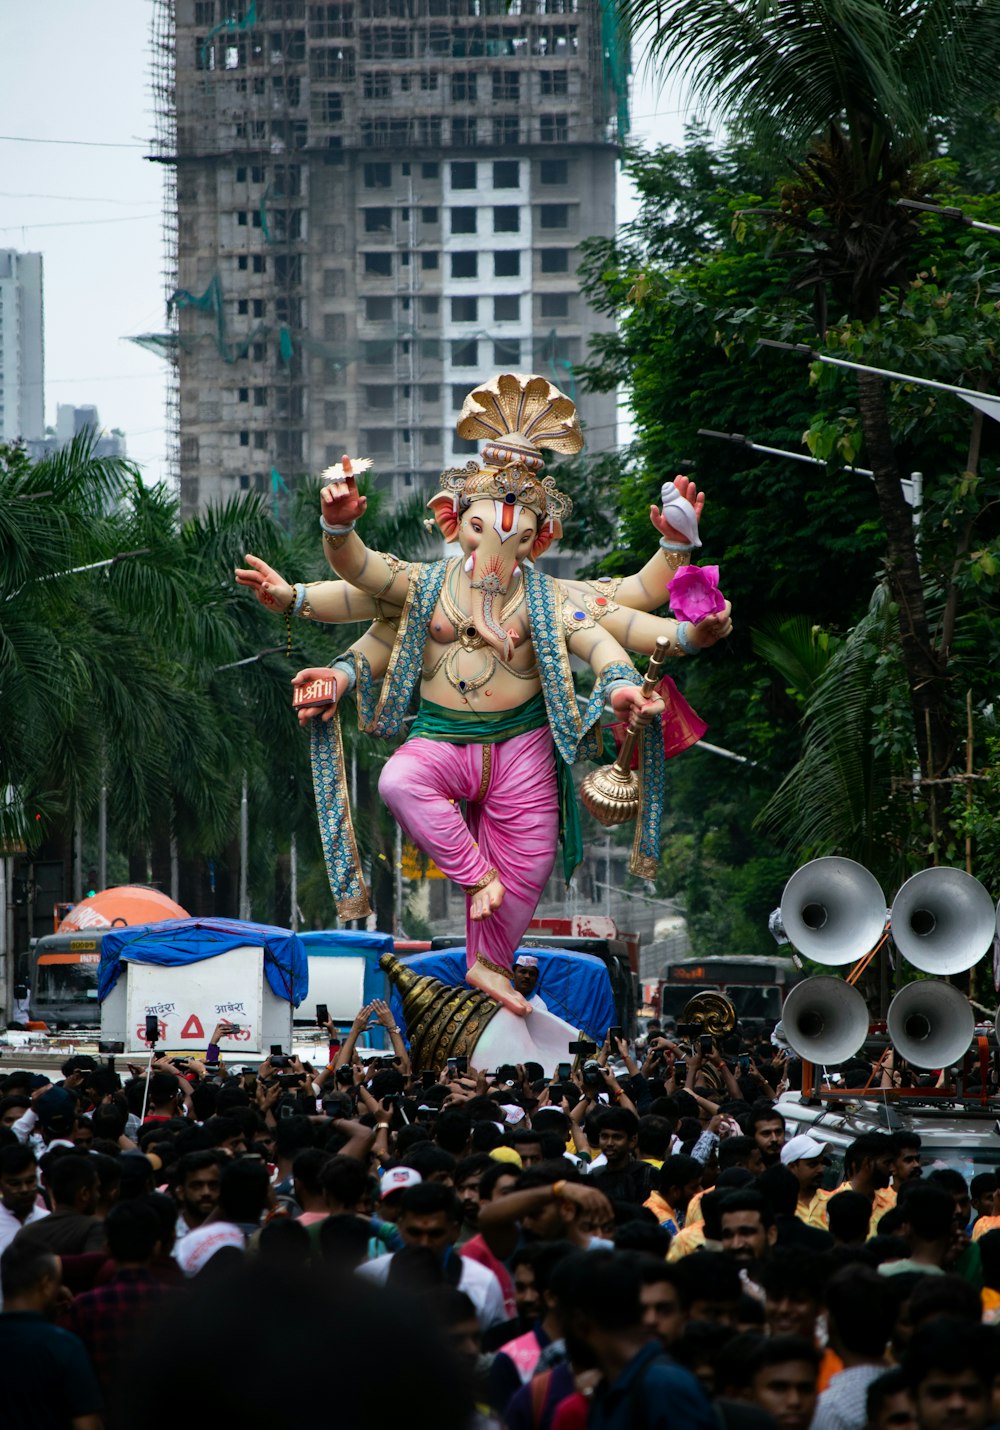 a large statue of a man riding on top of a float